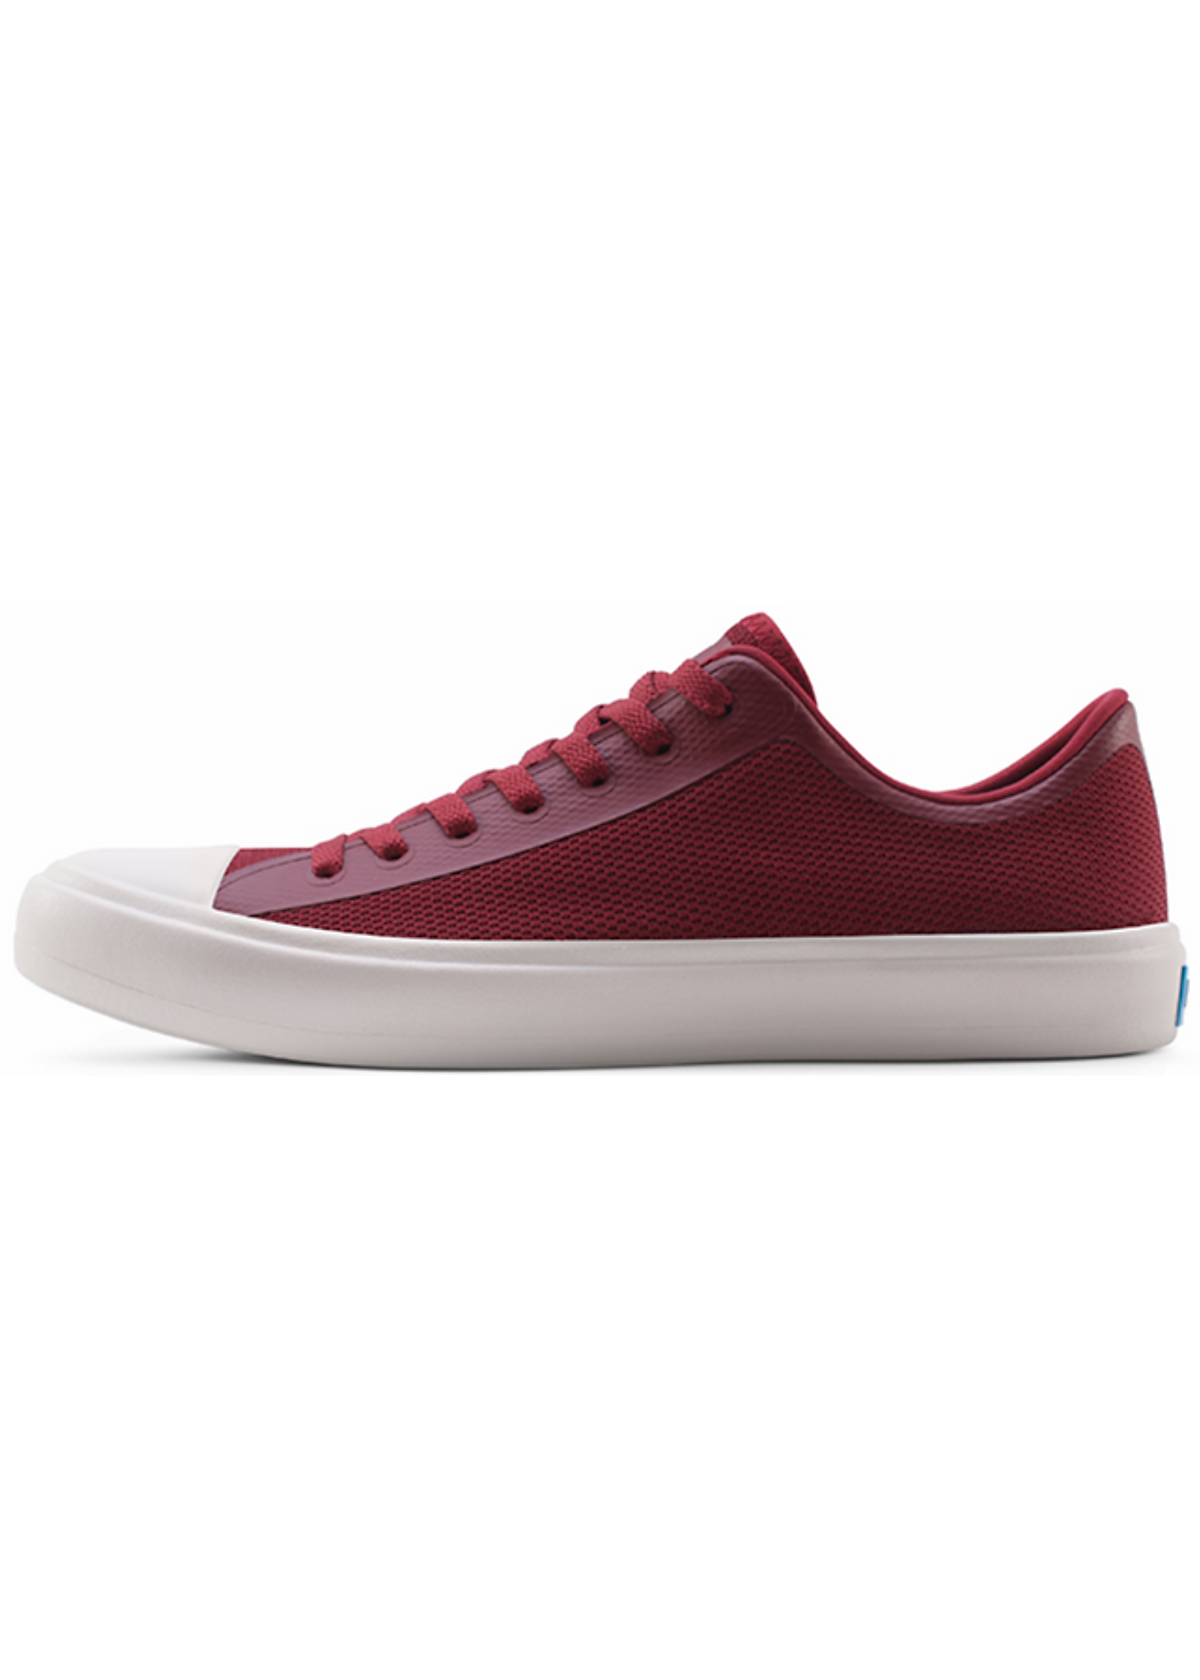 Giày Sneakers Nữ People Phillips NC01-026 - Highland Red W/ Picket White